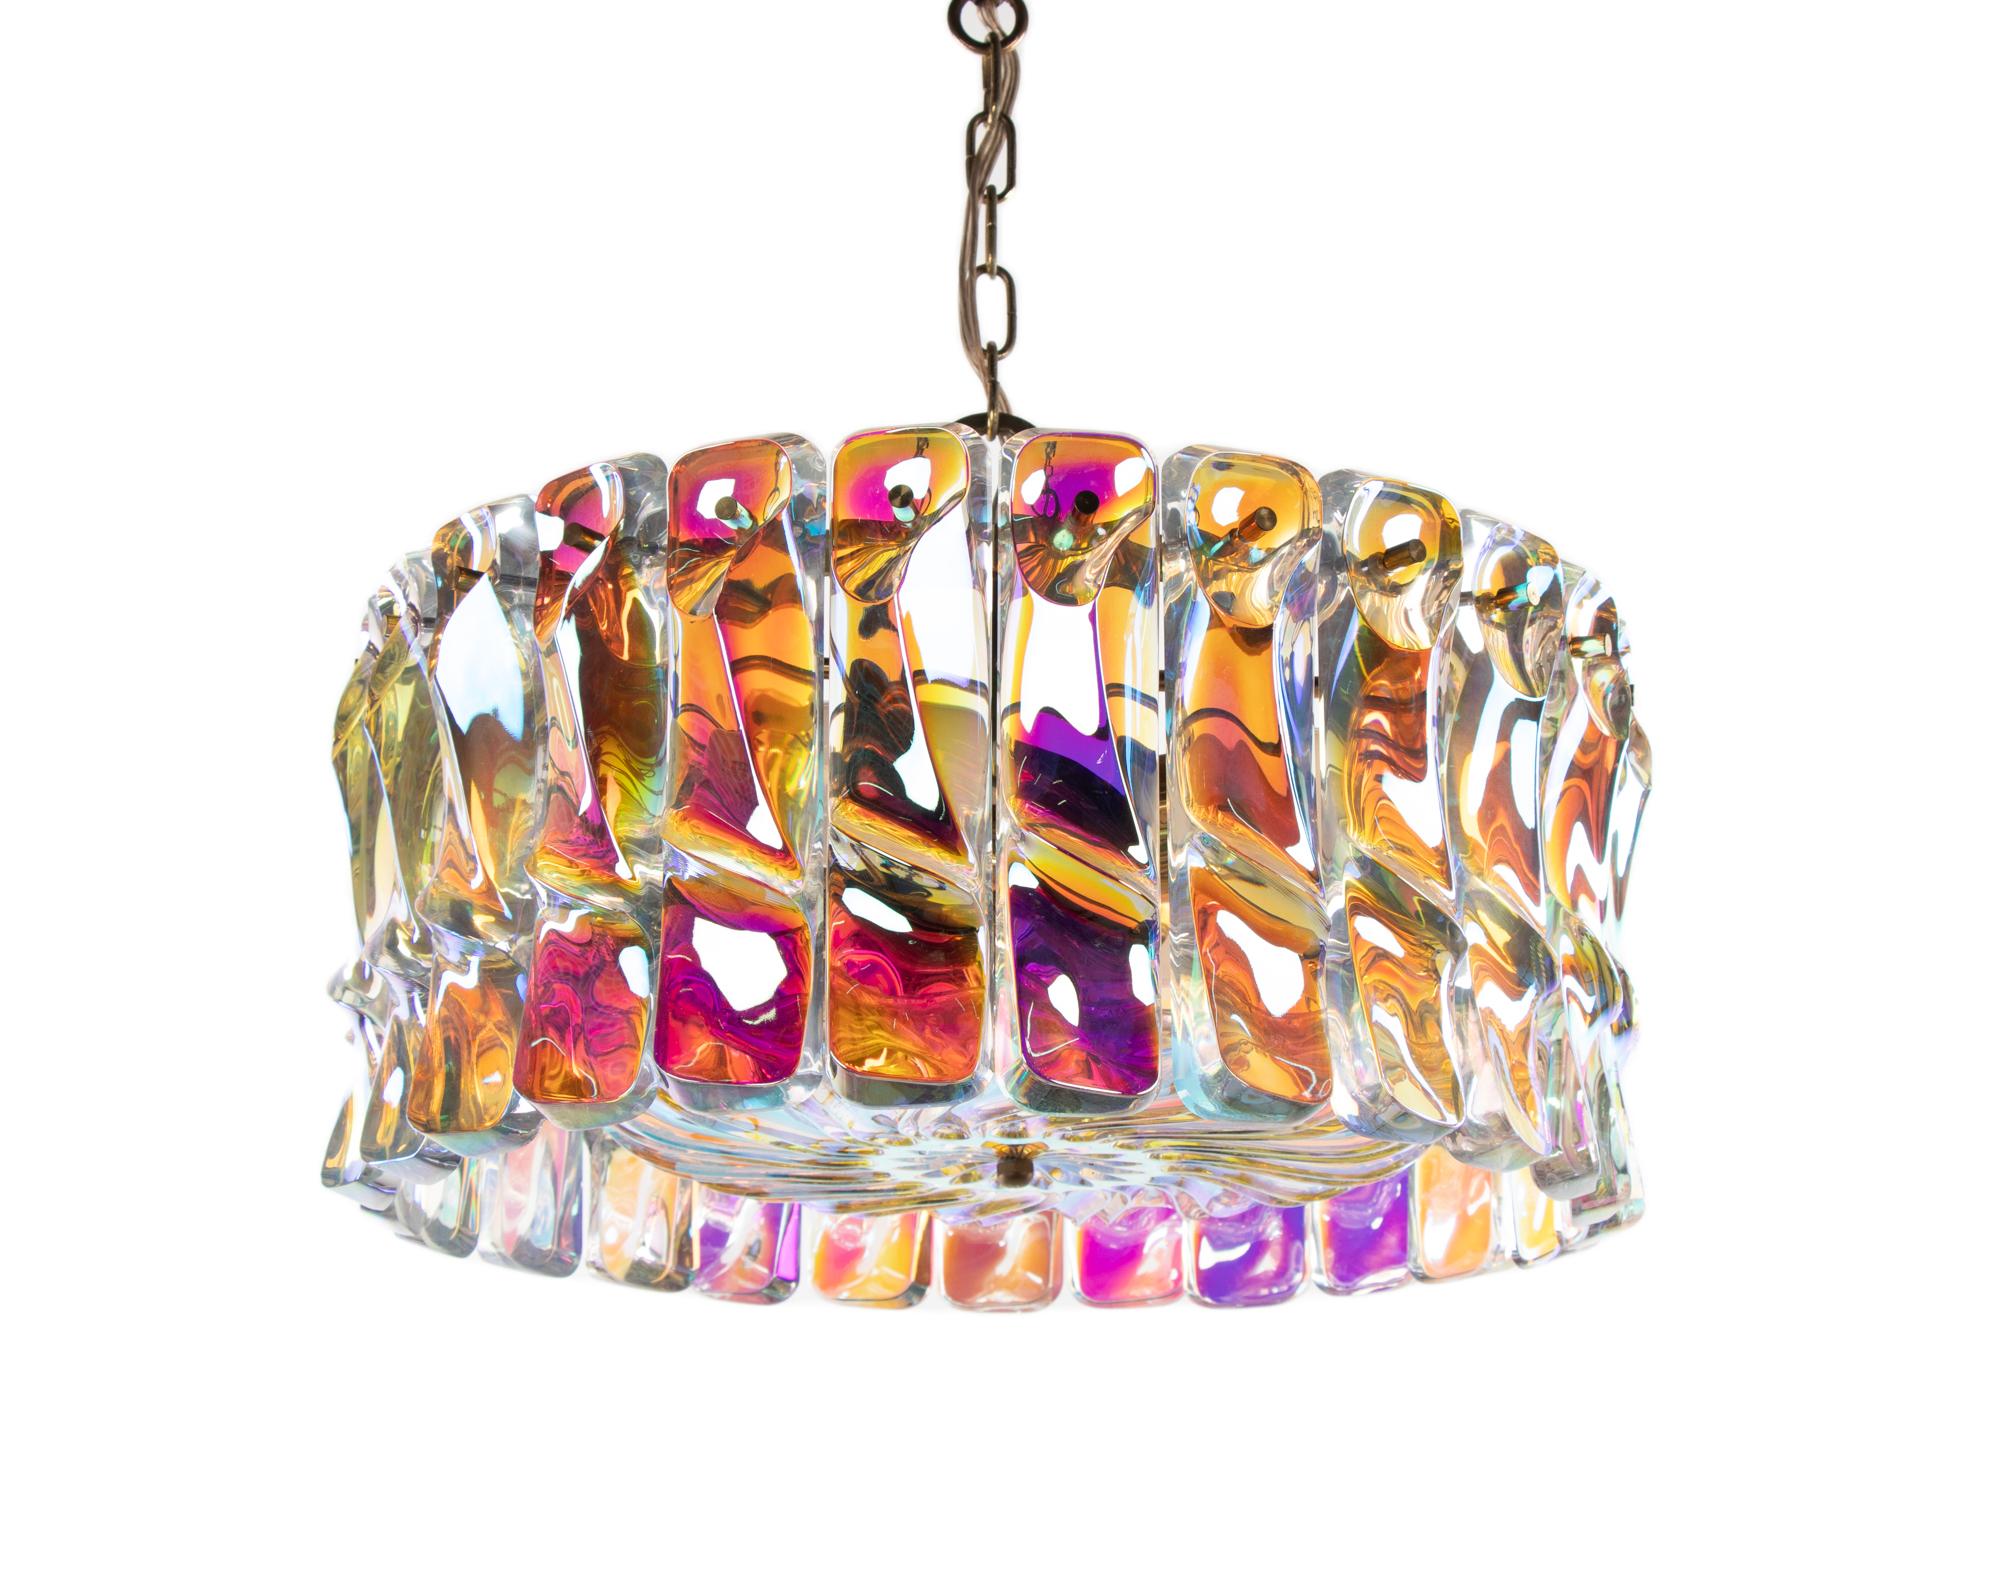 1960 Italy Glamorous Chandelier with Iridescent Venini Murano Glass & Brass For Sale 4